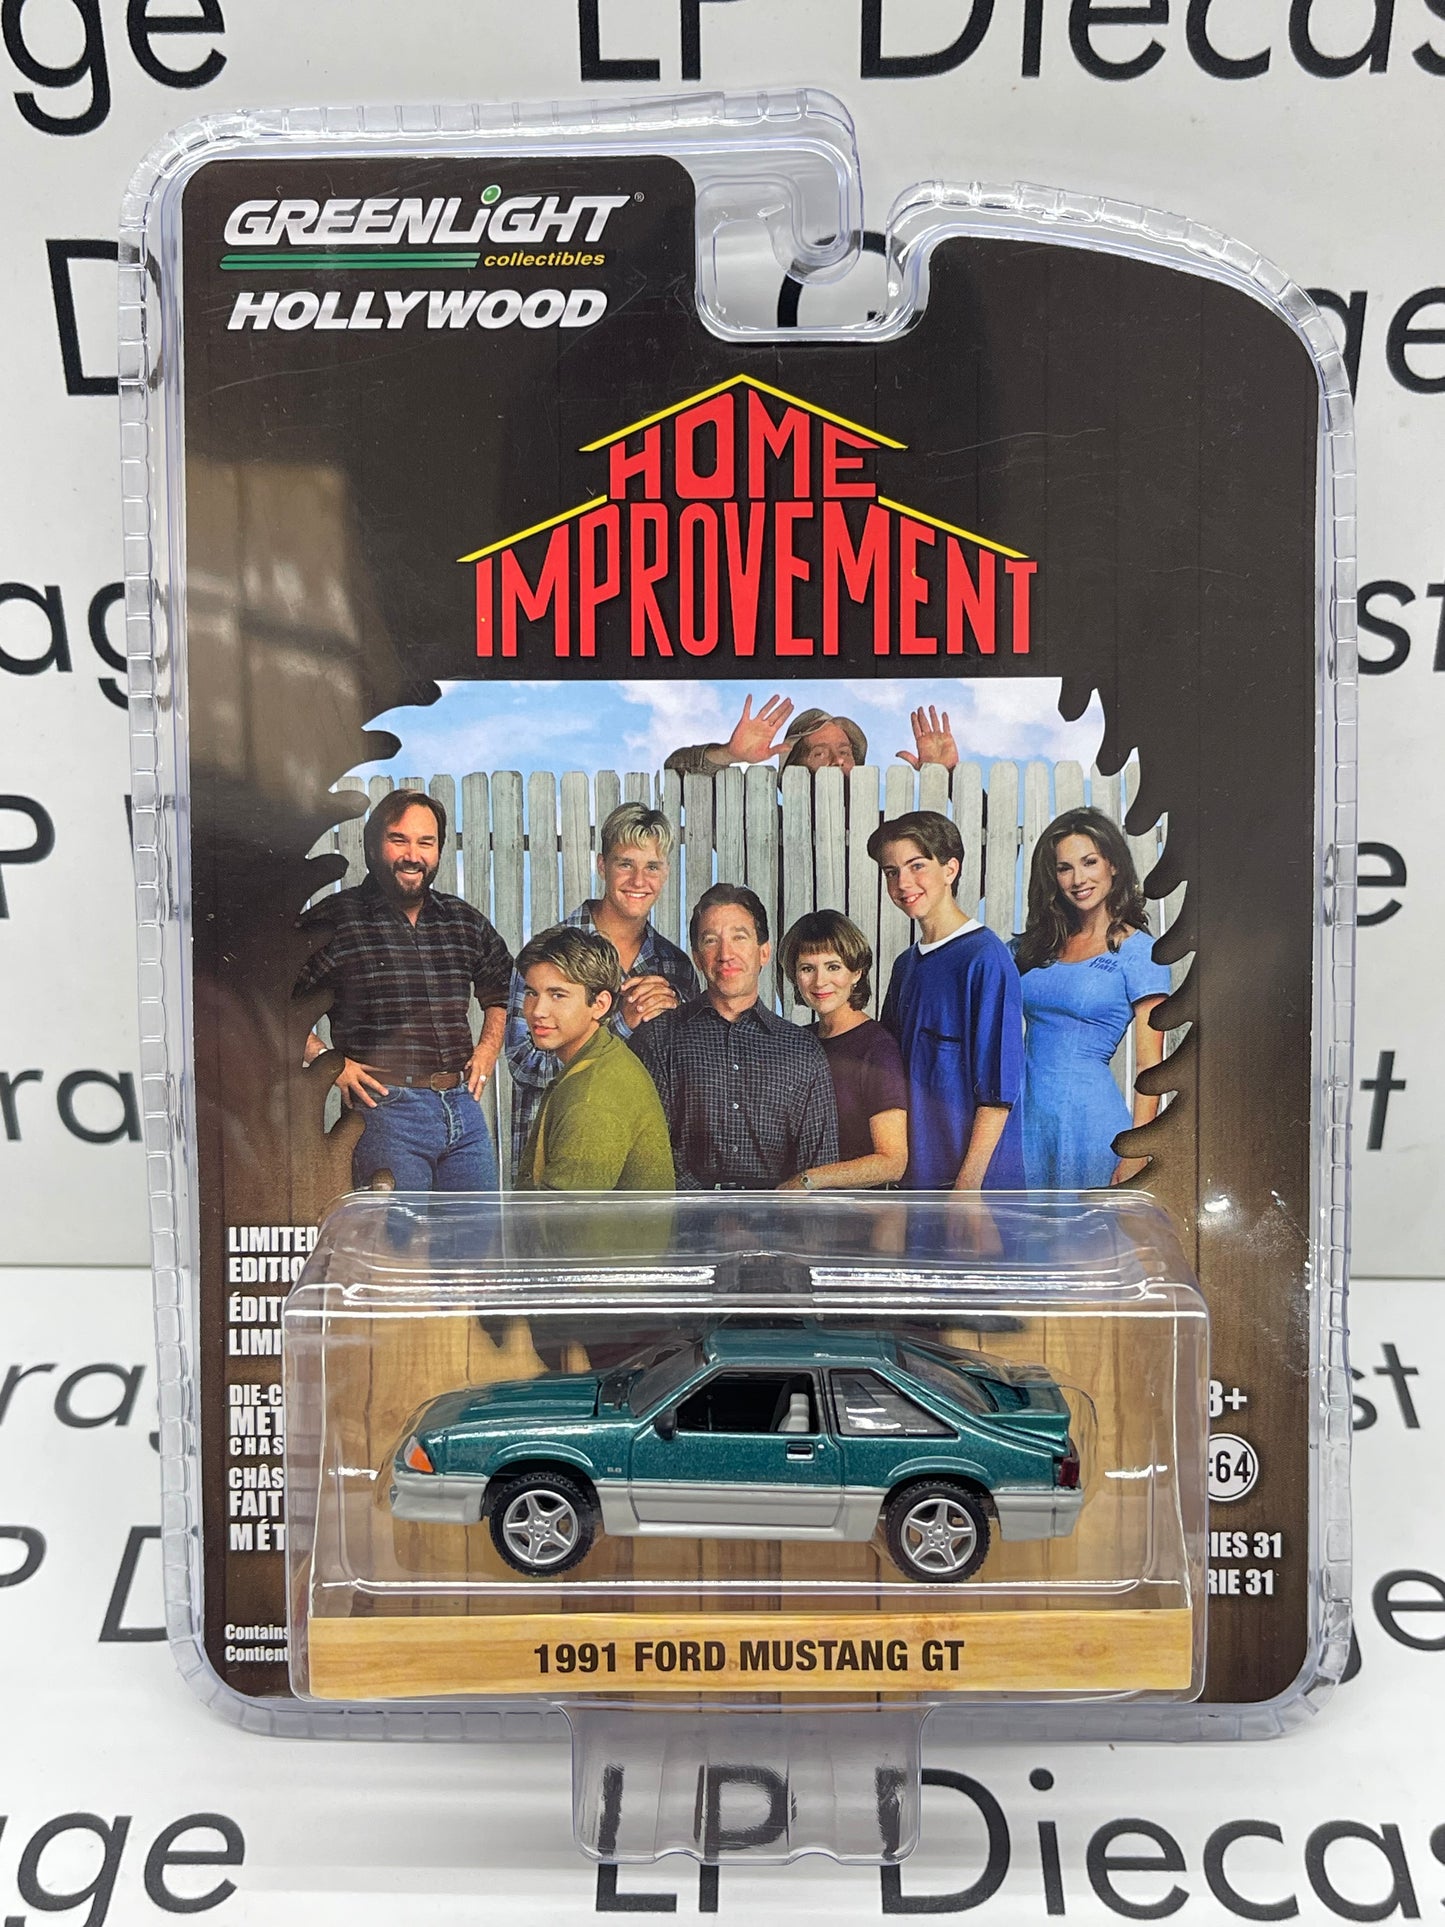 GREENLIGHT 1991 Ford Mustang GT "Home Improvement" 1:64 Diecast